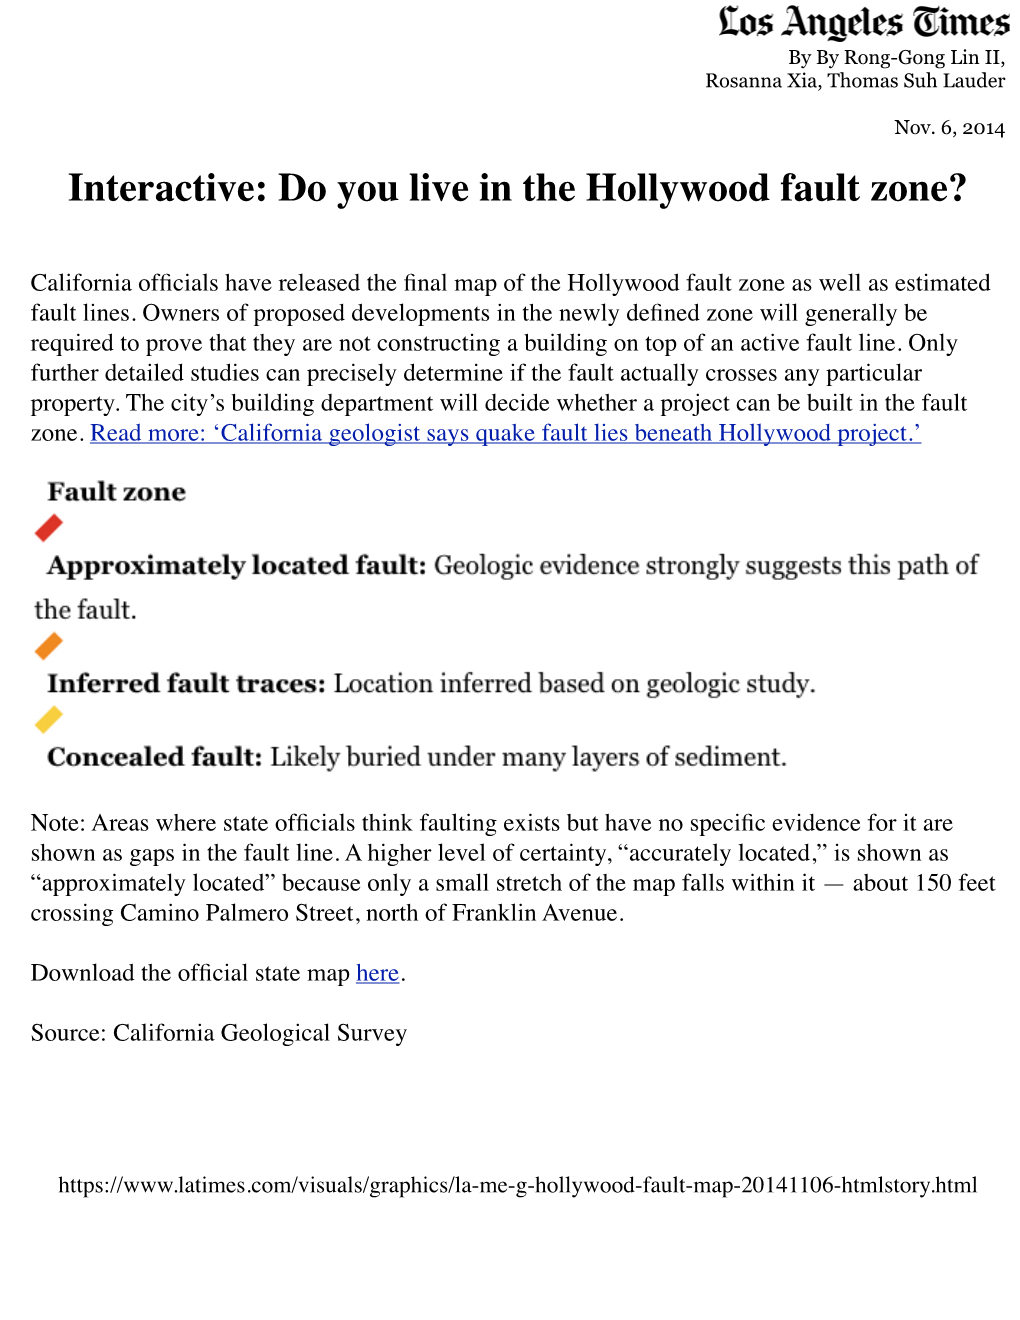 Interactive: Do You Live in the Hollywood Fault Zone?